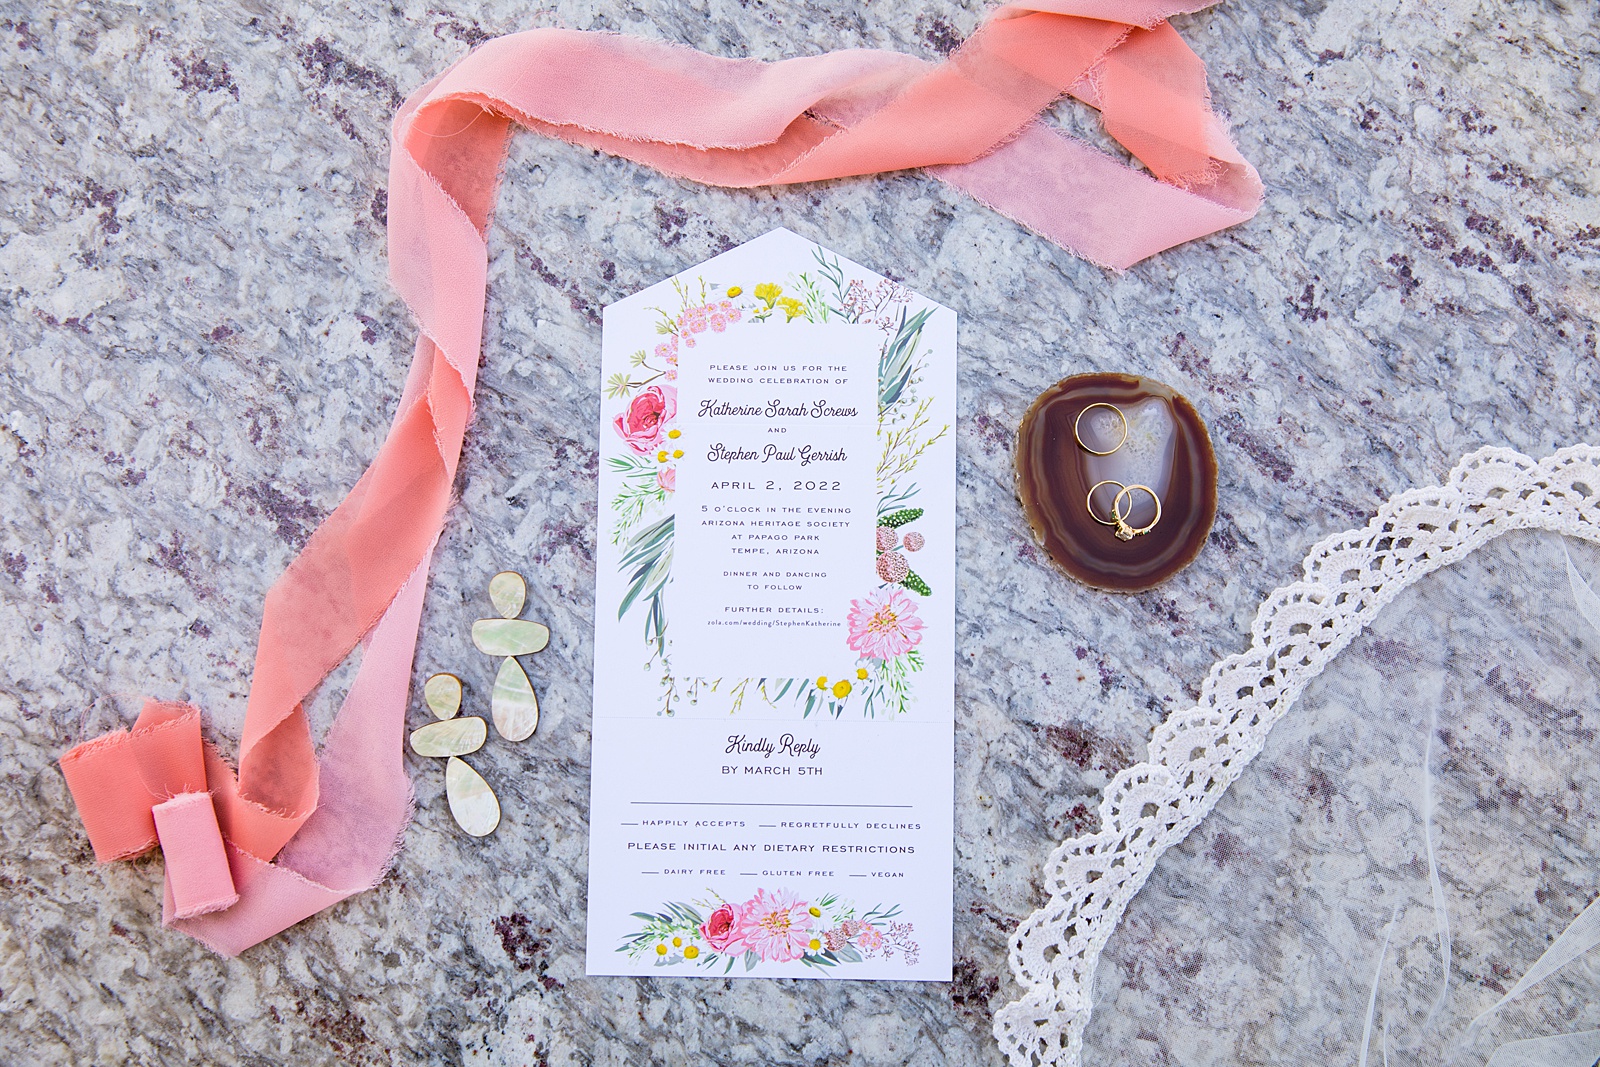 Brides's wedding day details of invitation, earings, rings and veil by PMA Photography.